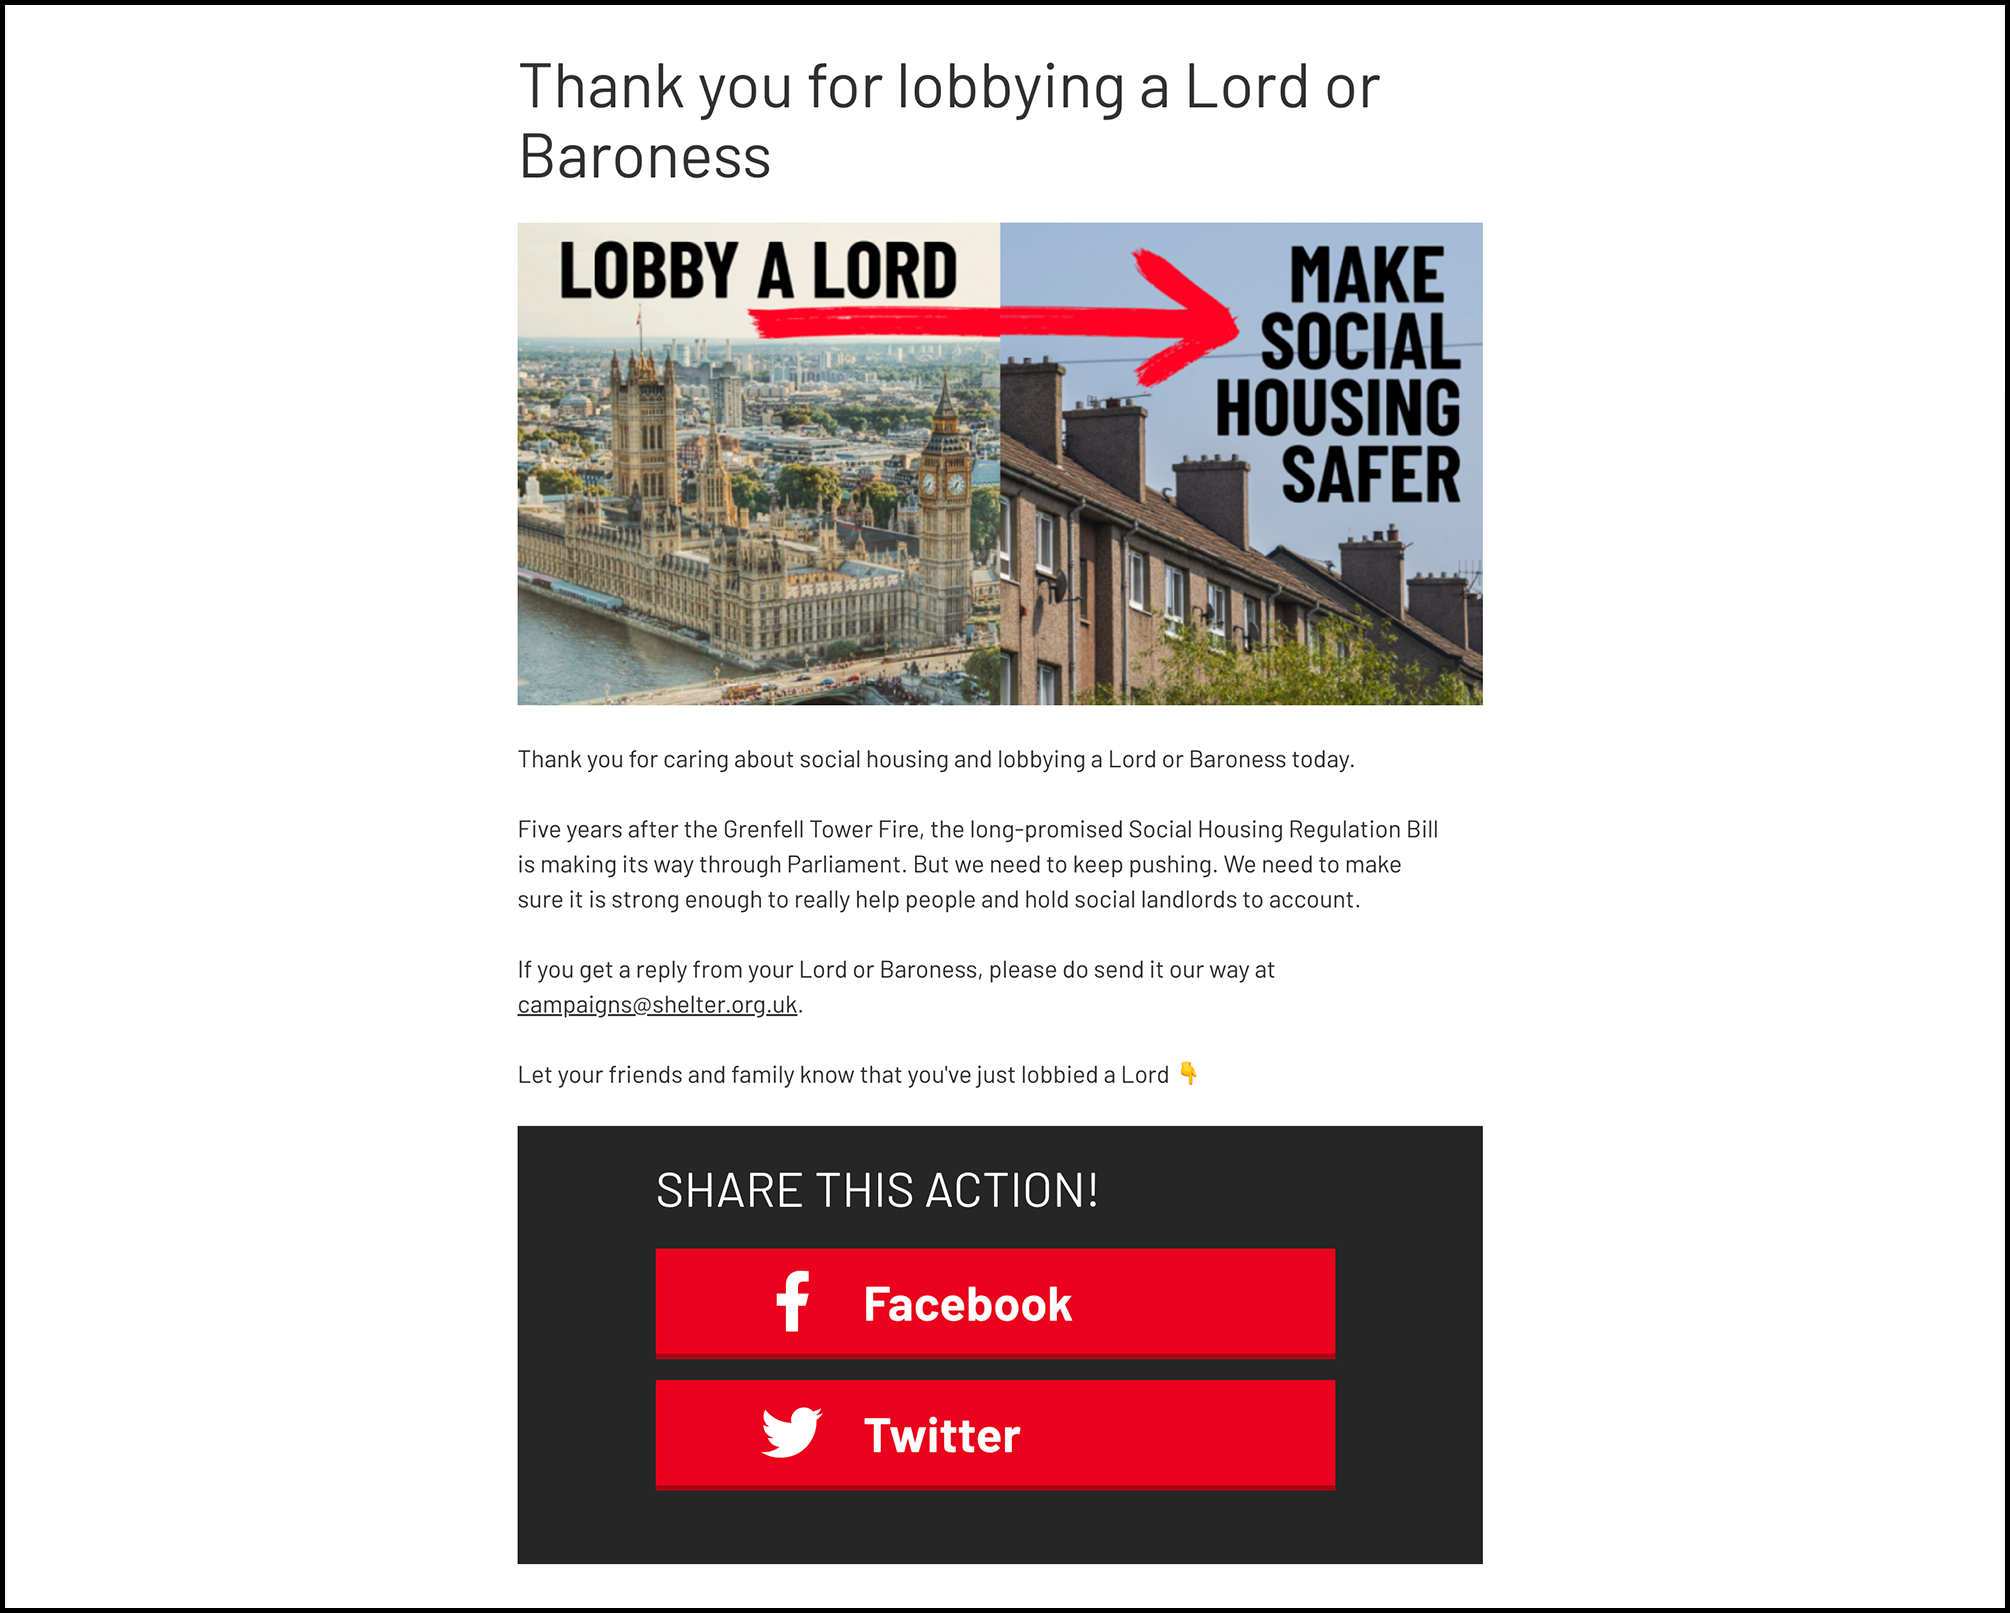 Thank you for lobbying a Lord or Baroness - screenshot of the desktop version of the Thank You page for the email to target action. Includes options to share action to Facebook or Twitter.